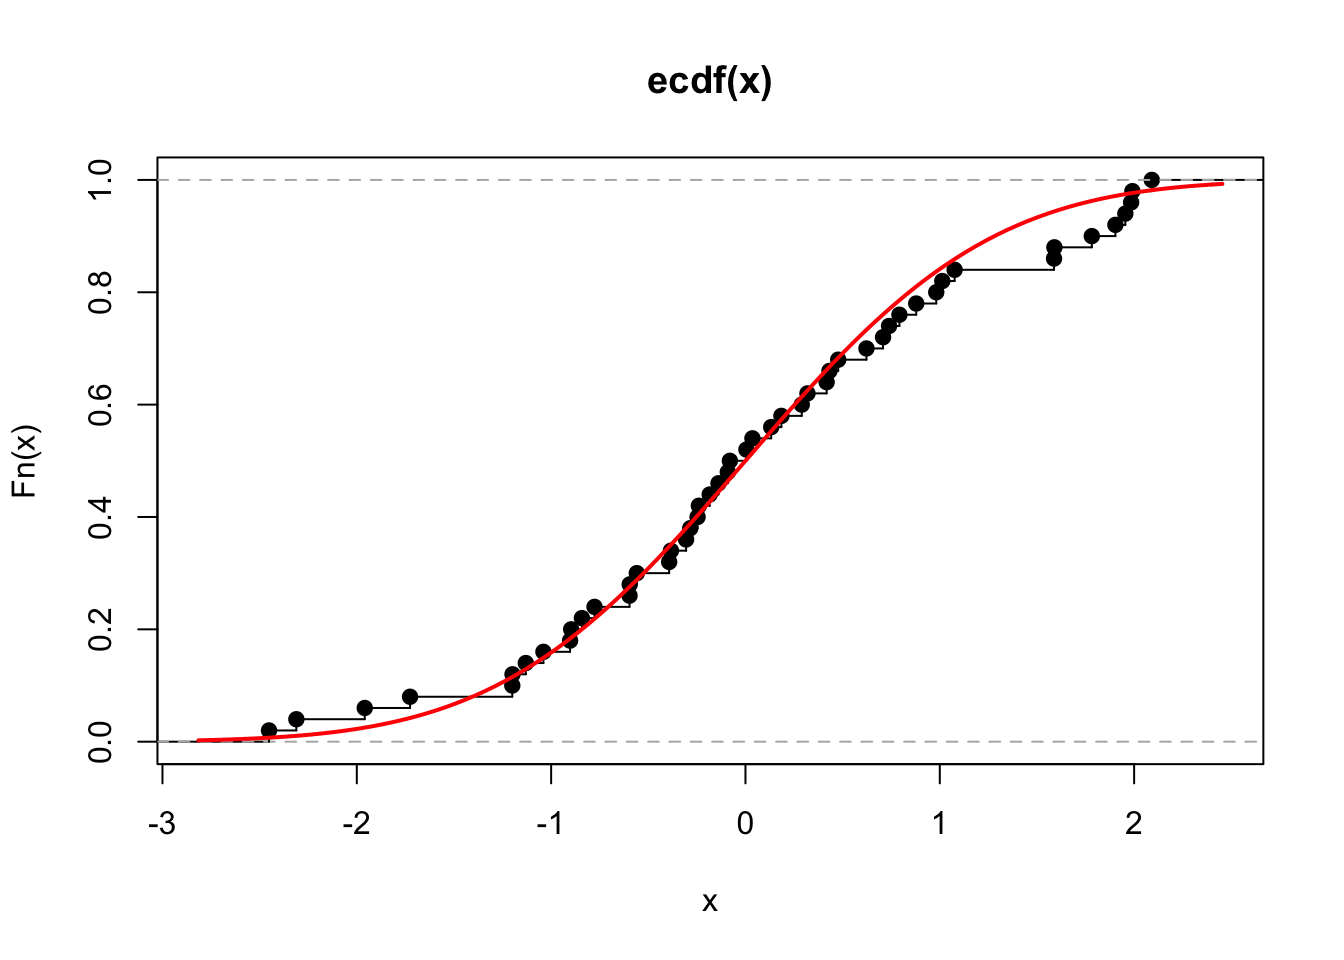 The ECDF for 50 observations drawn independently from a standard normal (black). The true distribution function for the standard normal is shown in red.